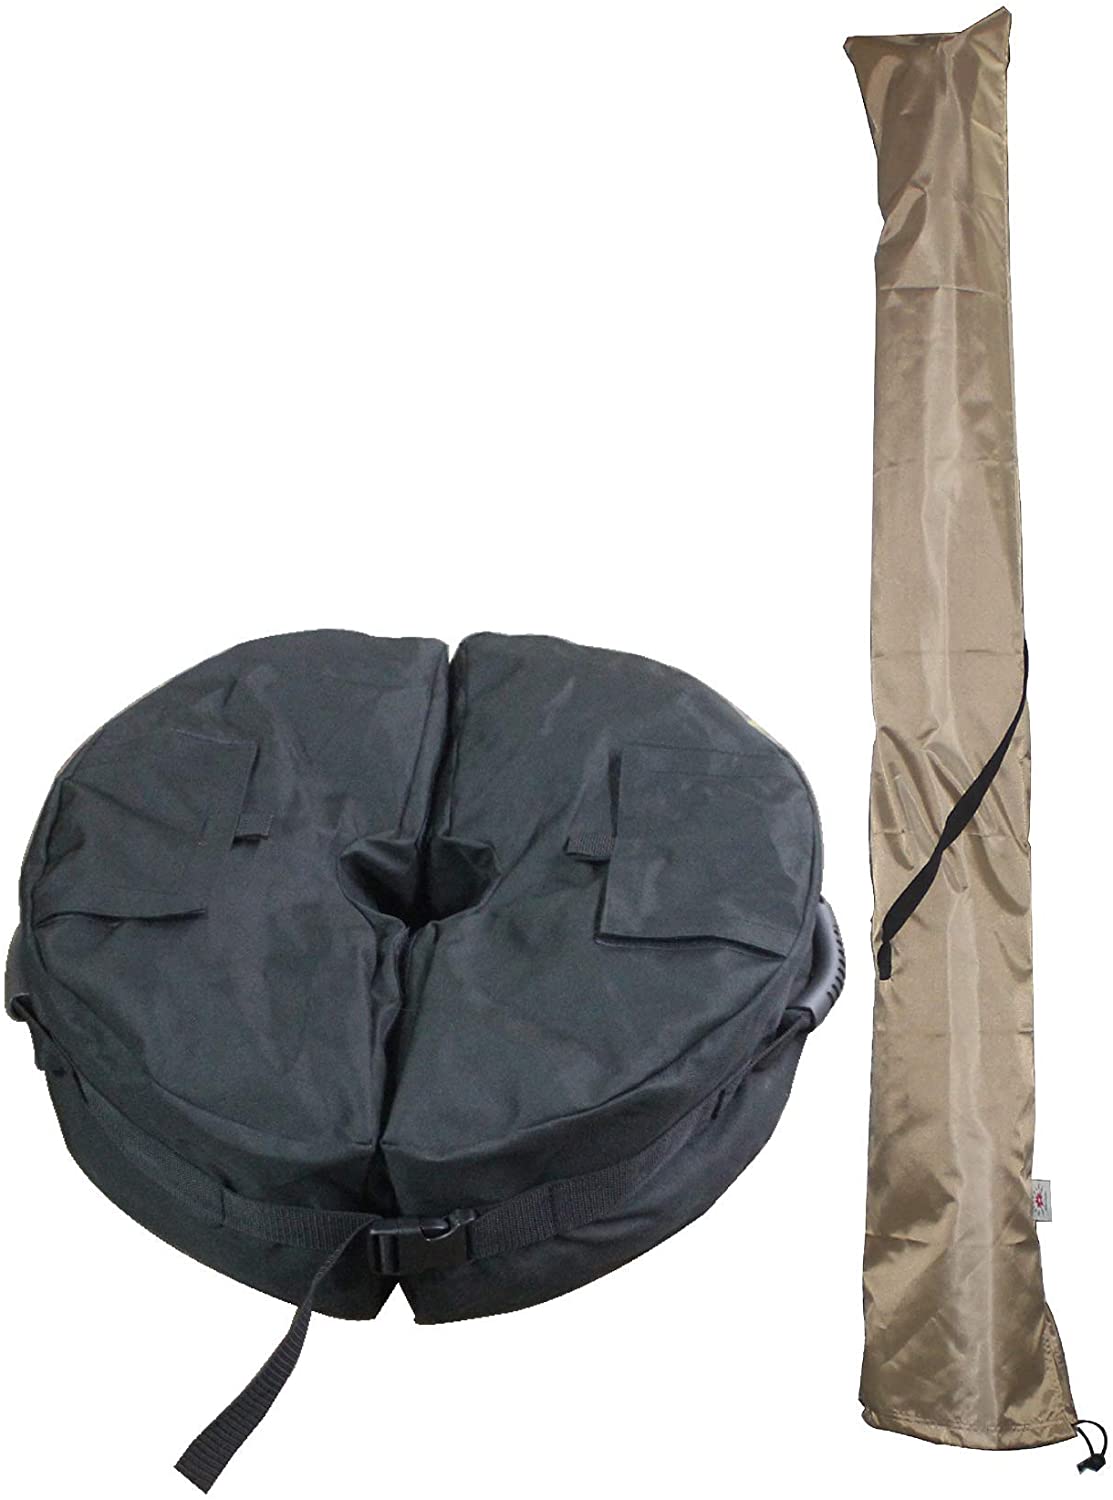 Umbrella Base Weight Bag &amp; a Water Proof Patio Umbrellas Cover - Detatchable Heavy Duty Sand Fillable Bag Anchor with Big Opening Strong Handles for Cantilever Offset Outdoor Beach Parasol Holder